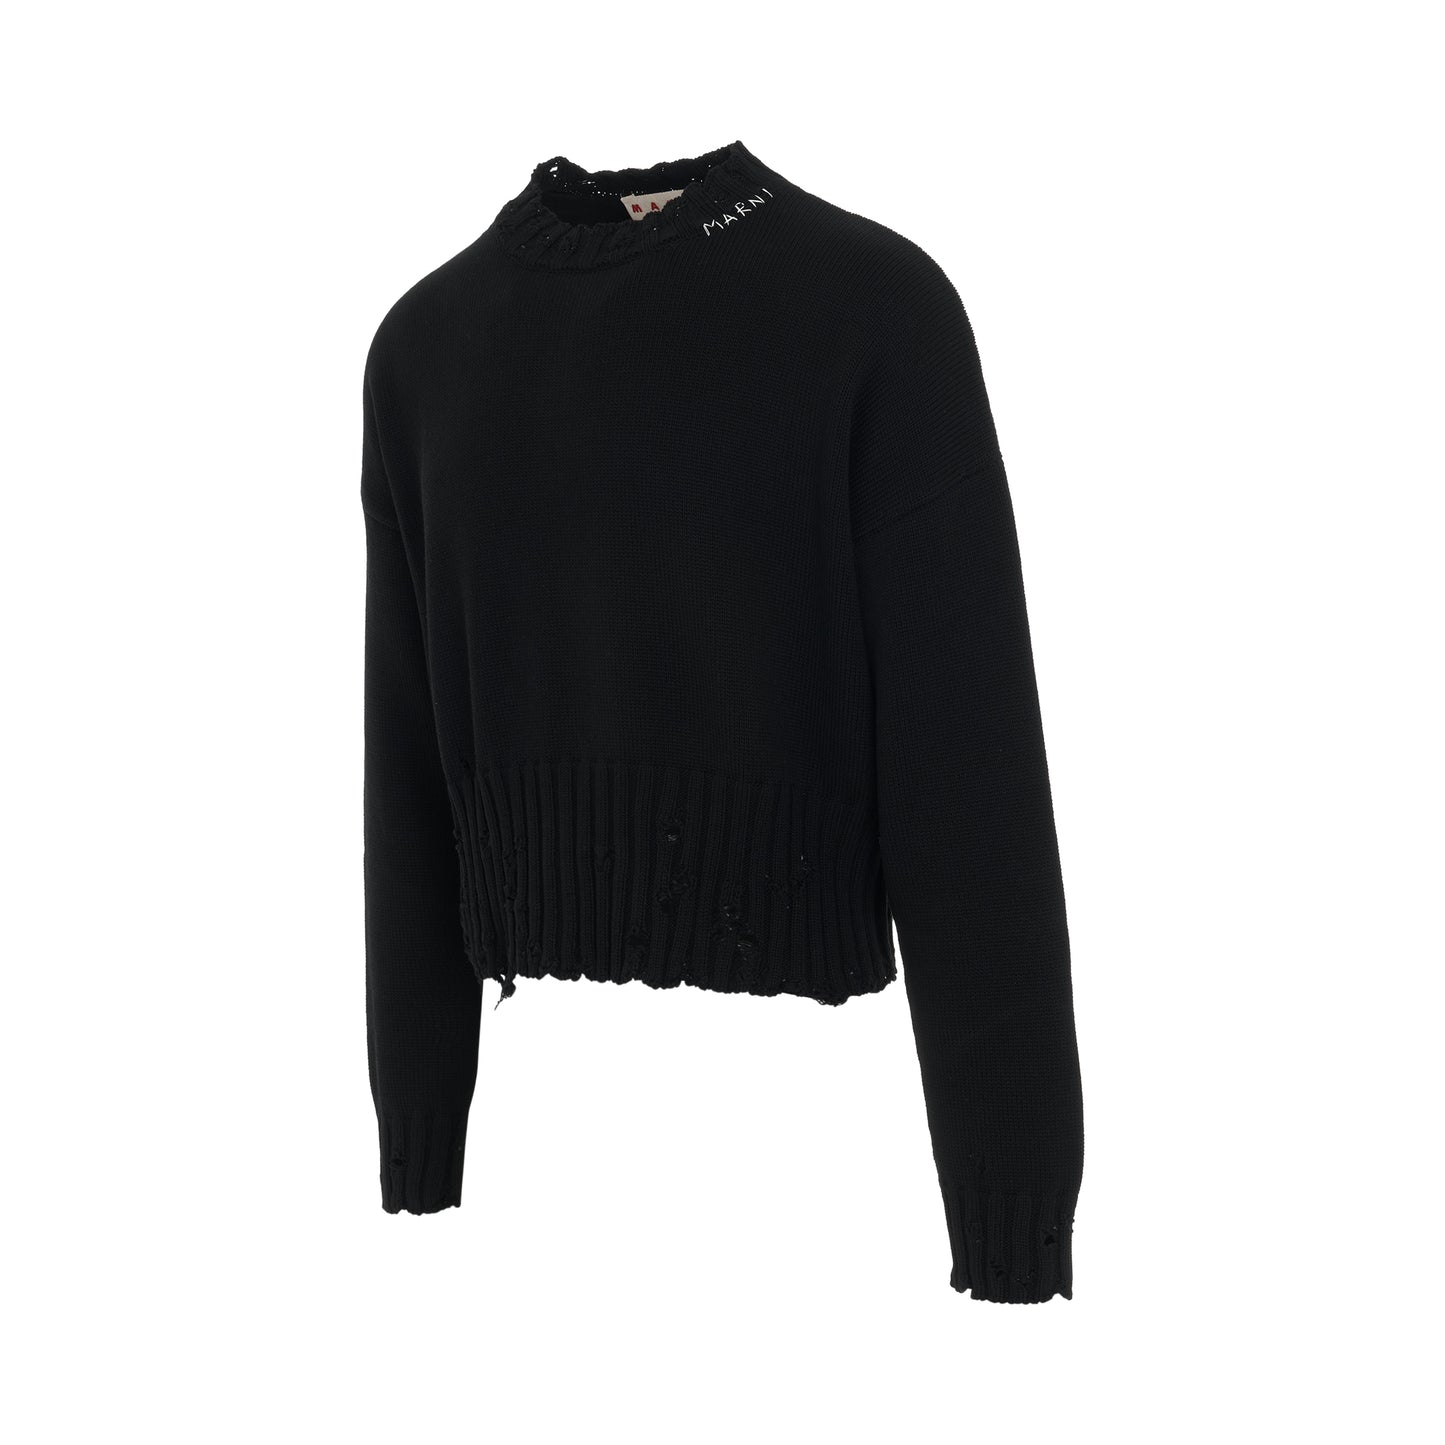 Boxy Destroyed Knit Sweater in Black